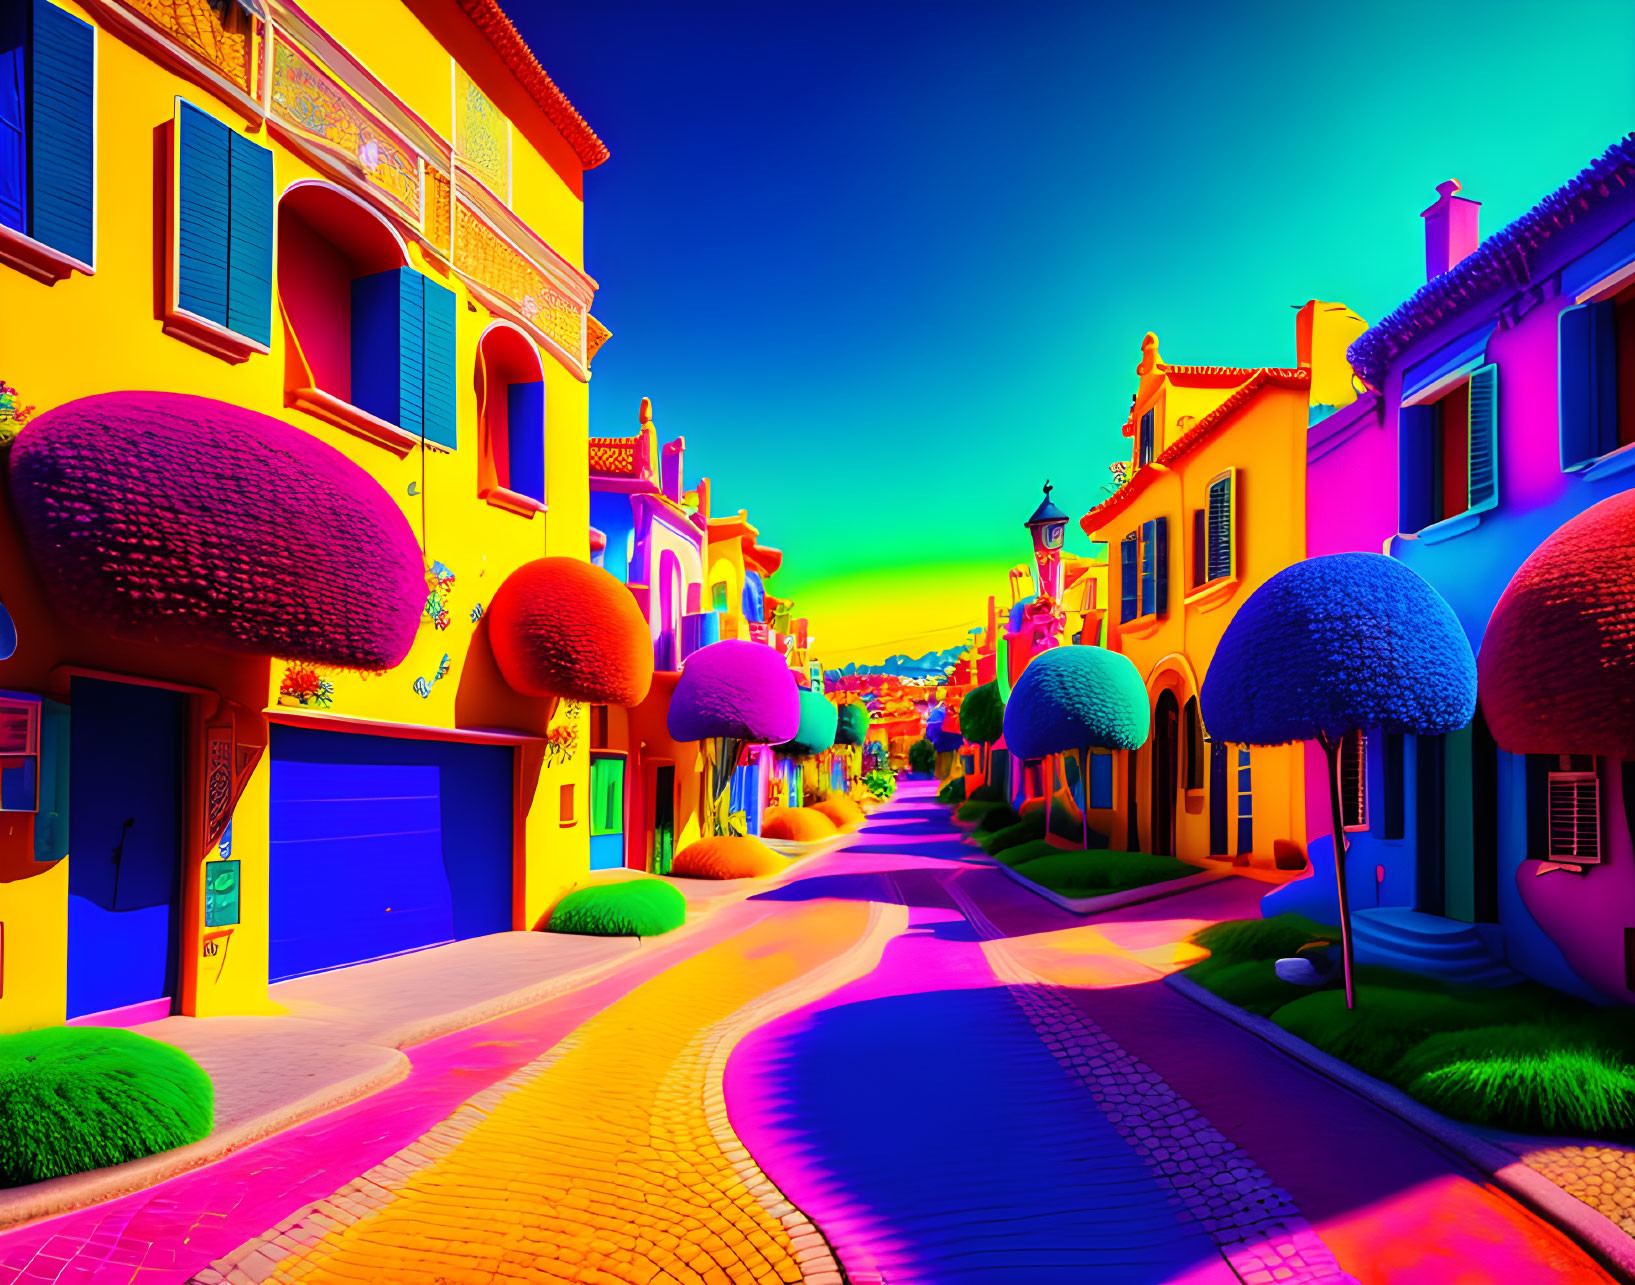 Colorful surreal street scene with neon buildings, trees, and sky